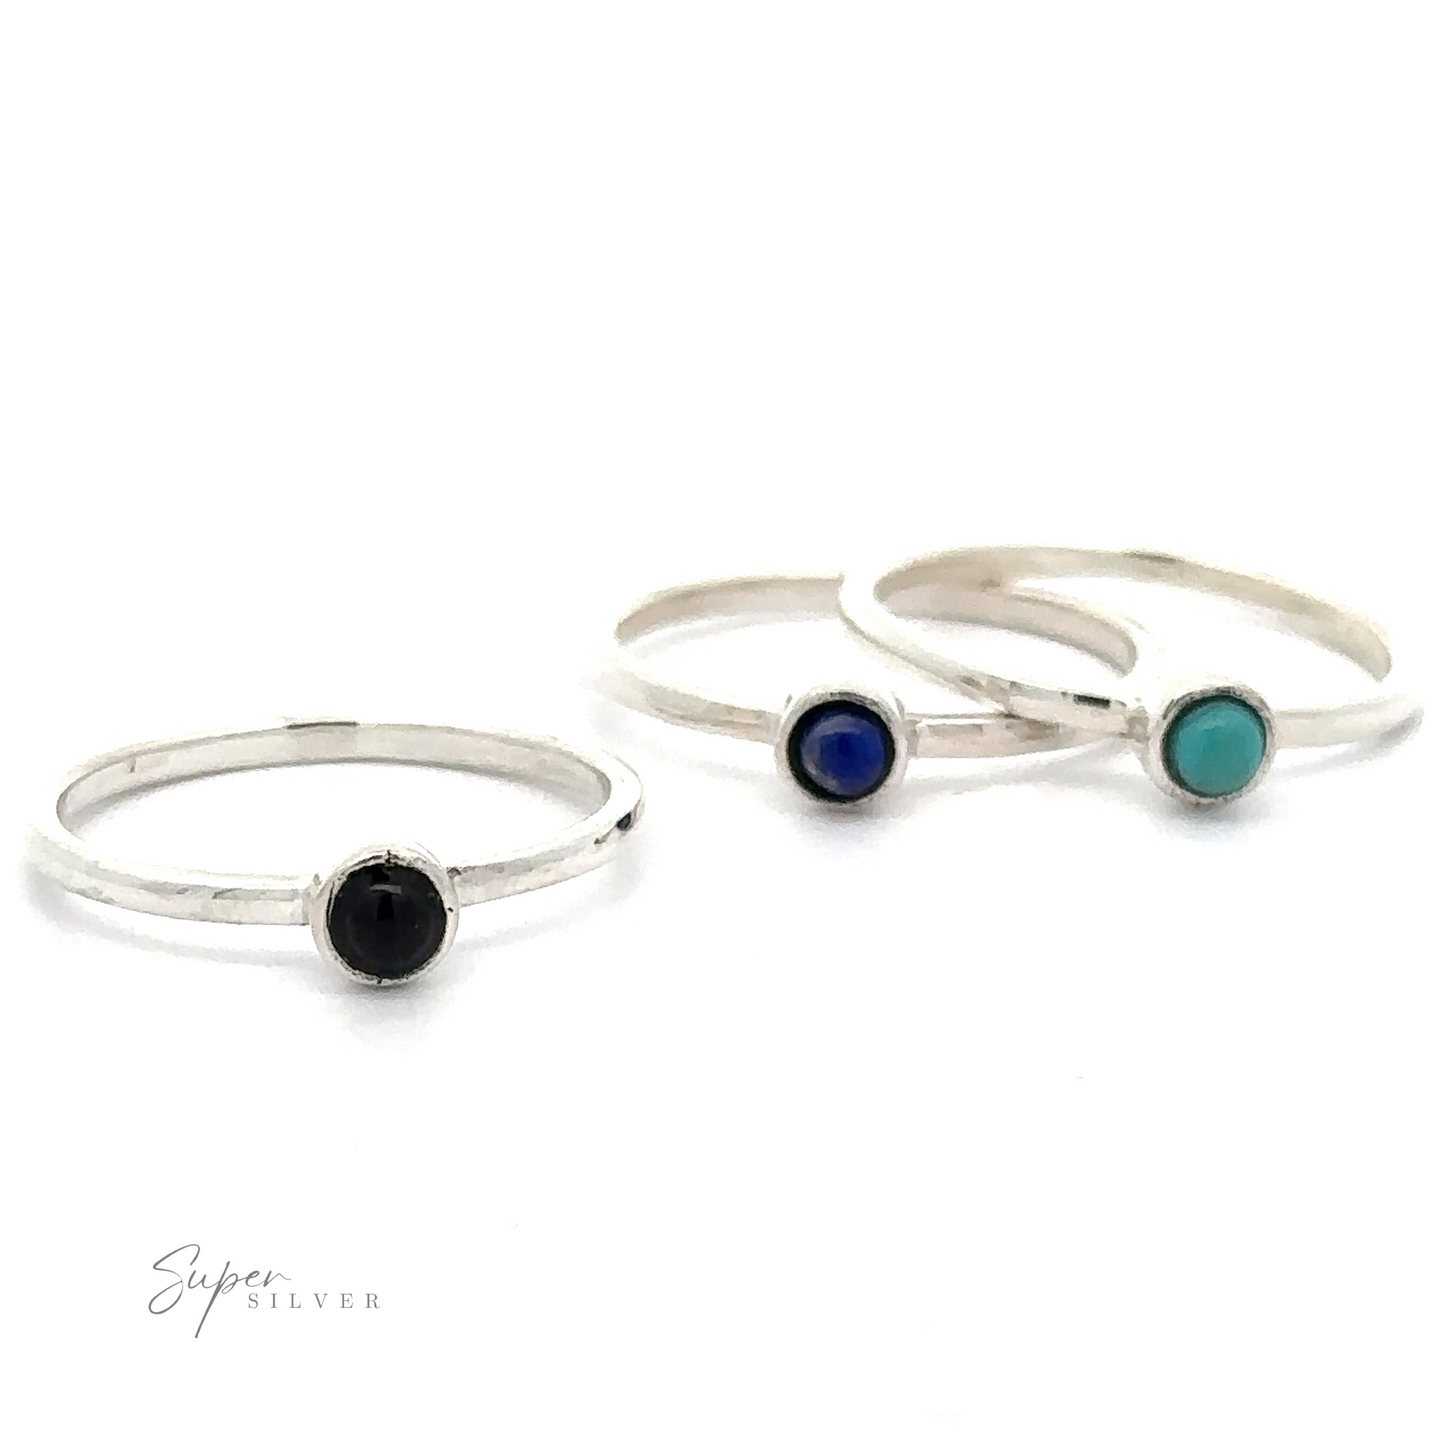 Three sterling silver rings, each with a circular stone—one black, one blue, one turquoise—are arranged in a diagonal line against a white background. "Dainty Stackable Round Gemstone Ring" text is visible in the bottom-left corner. Perfect for fans of minimalist fashion, these stackable rings add subtle elegance to any outfit.